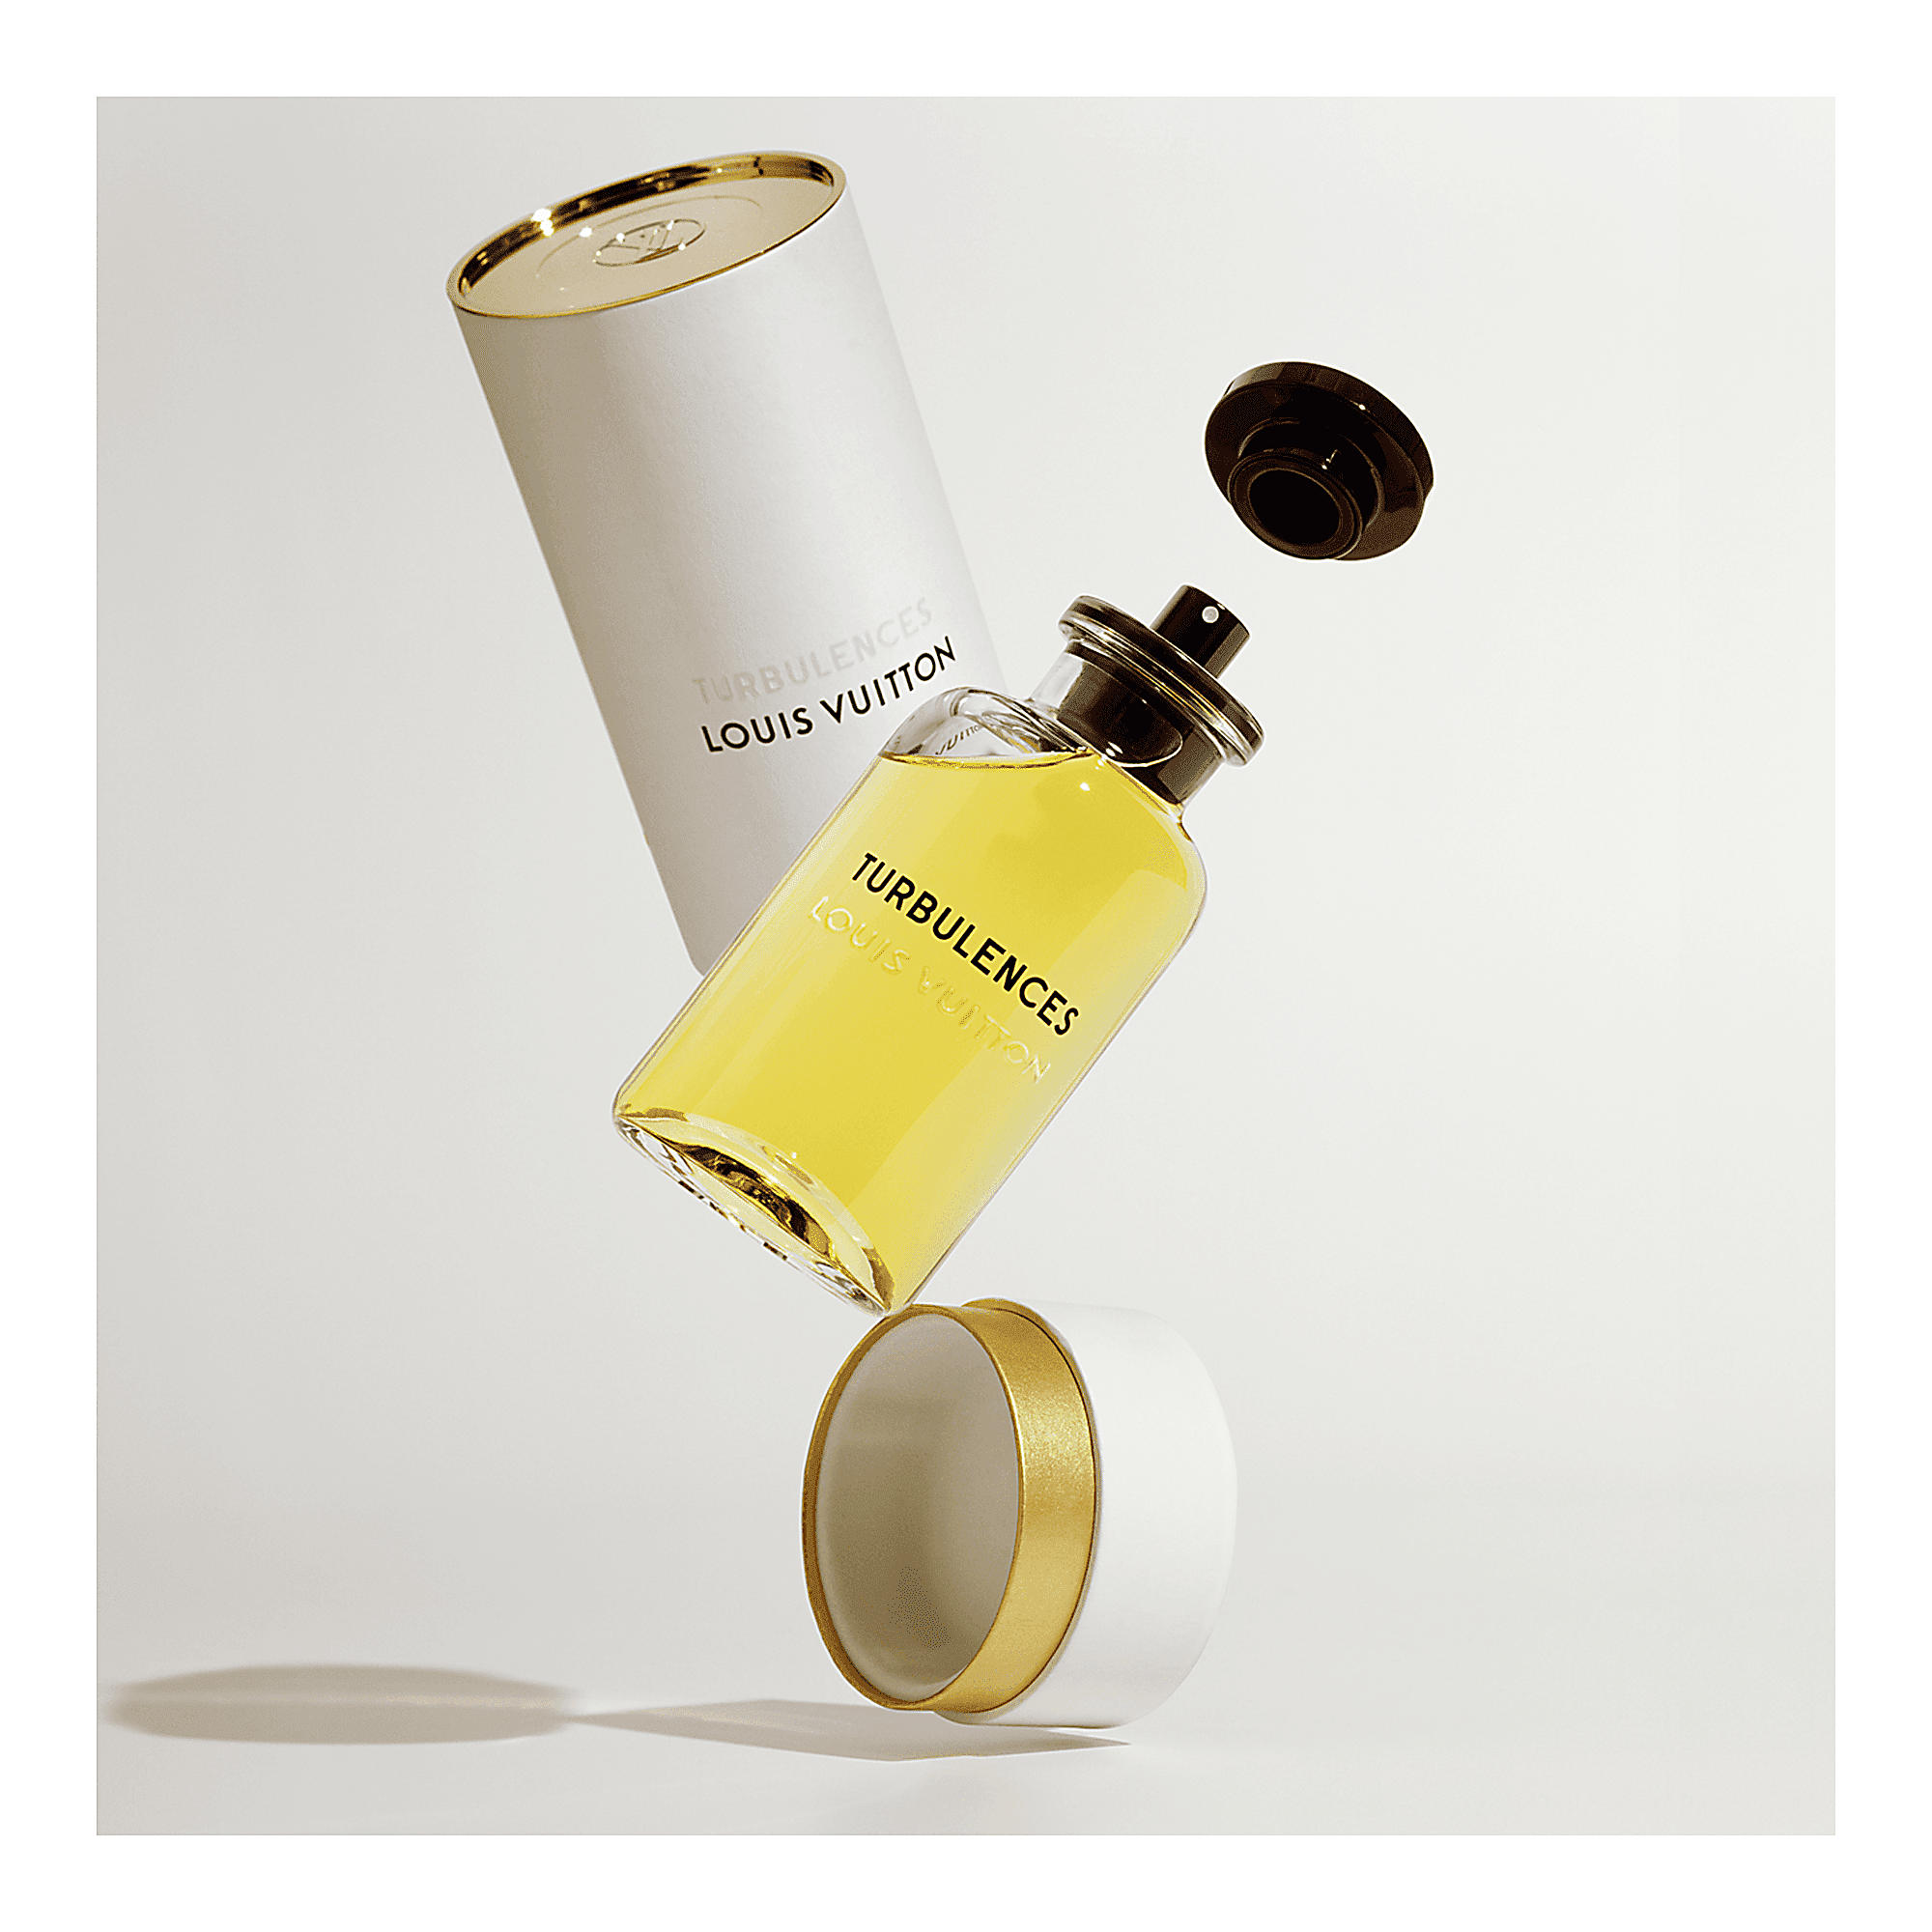 Louis Vuitton's New Fragrance Recreates The Feeling Of Sun And Sand On Skin  - ELLE SINGAPORE